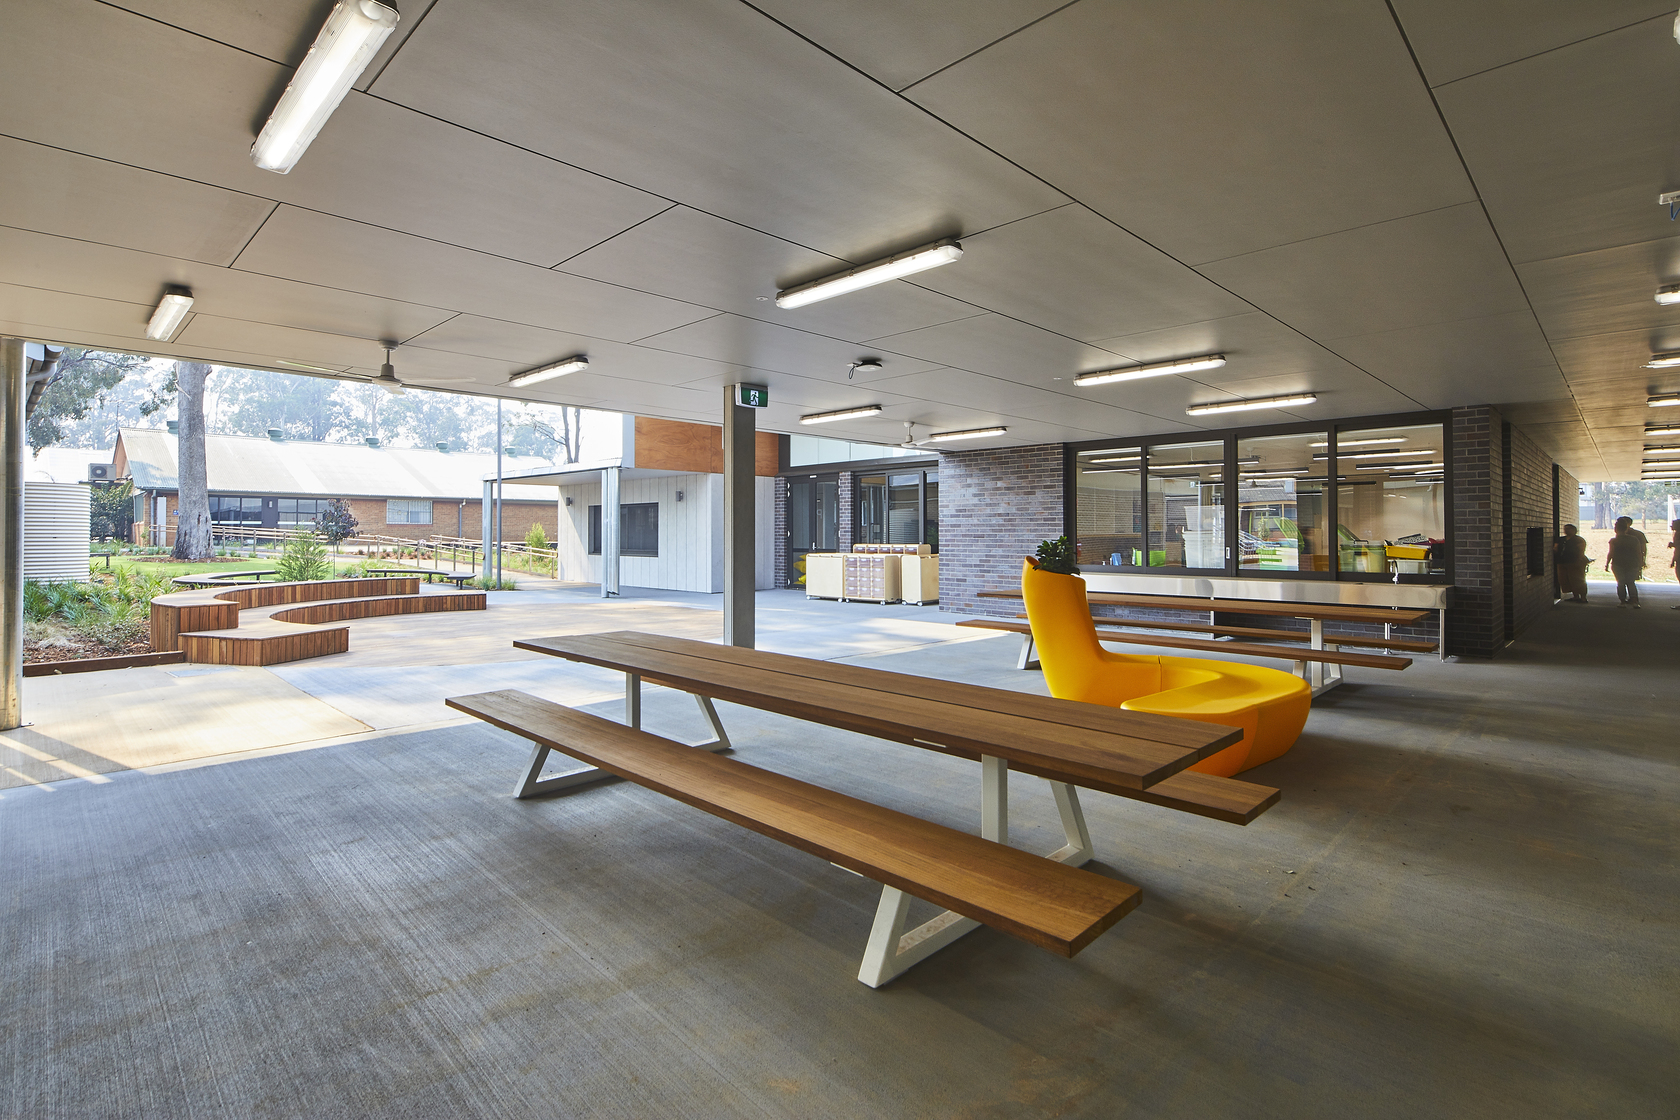 Eating area for students